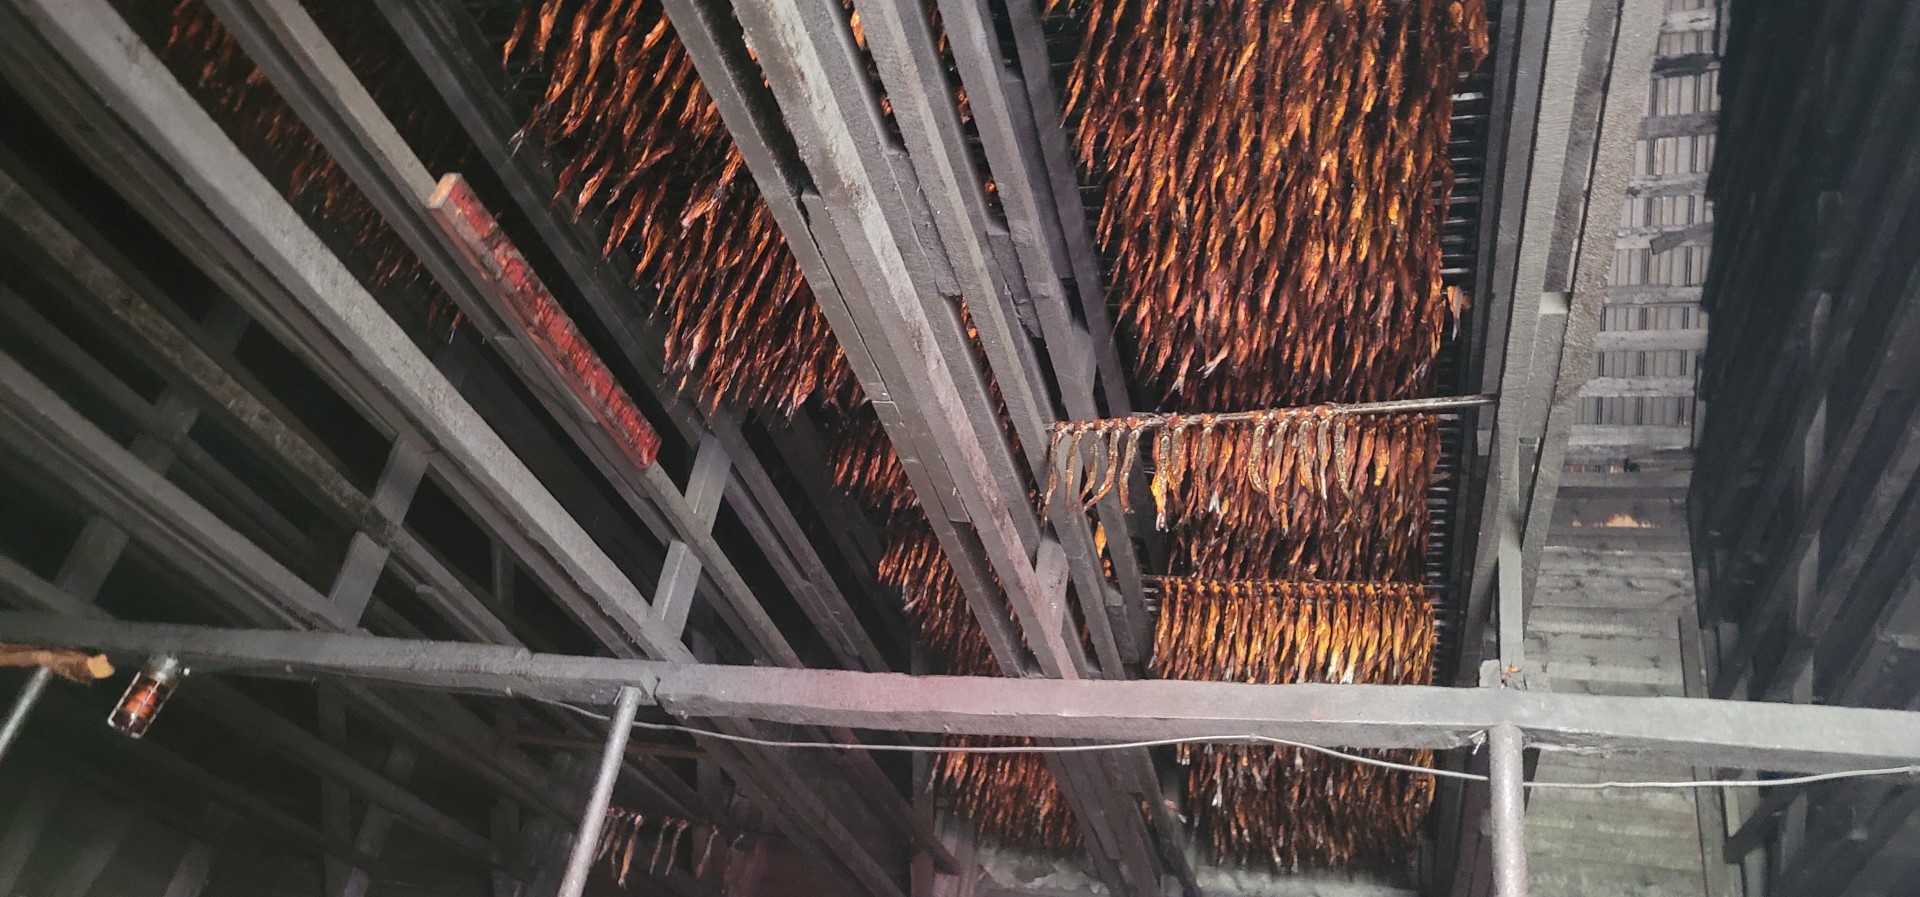 Herring being dried in a smokehouse